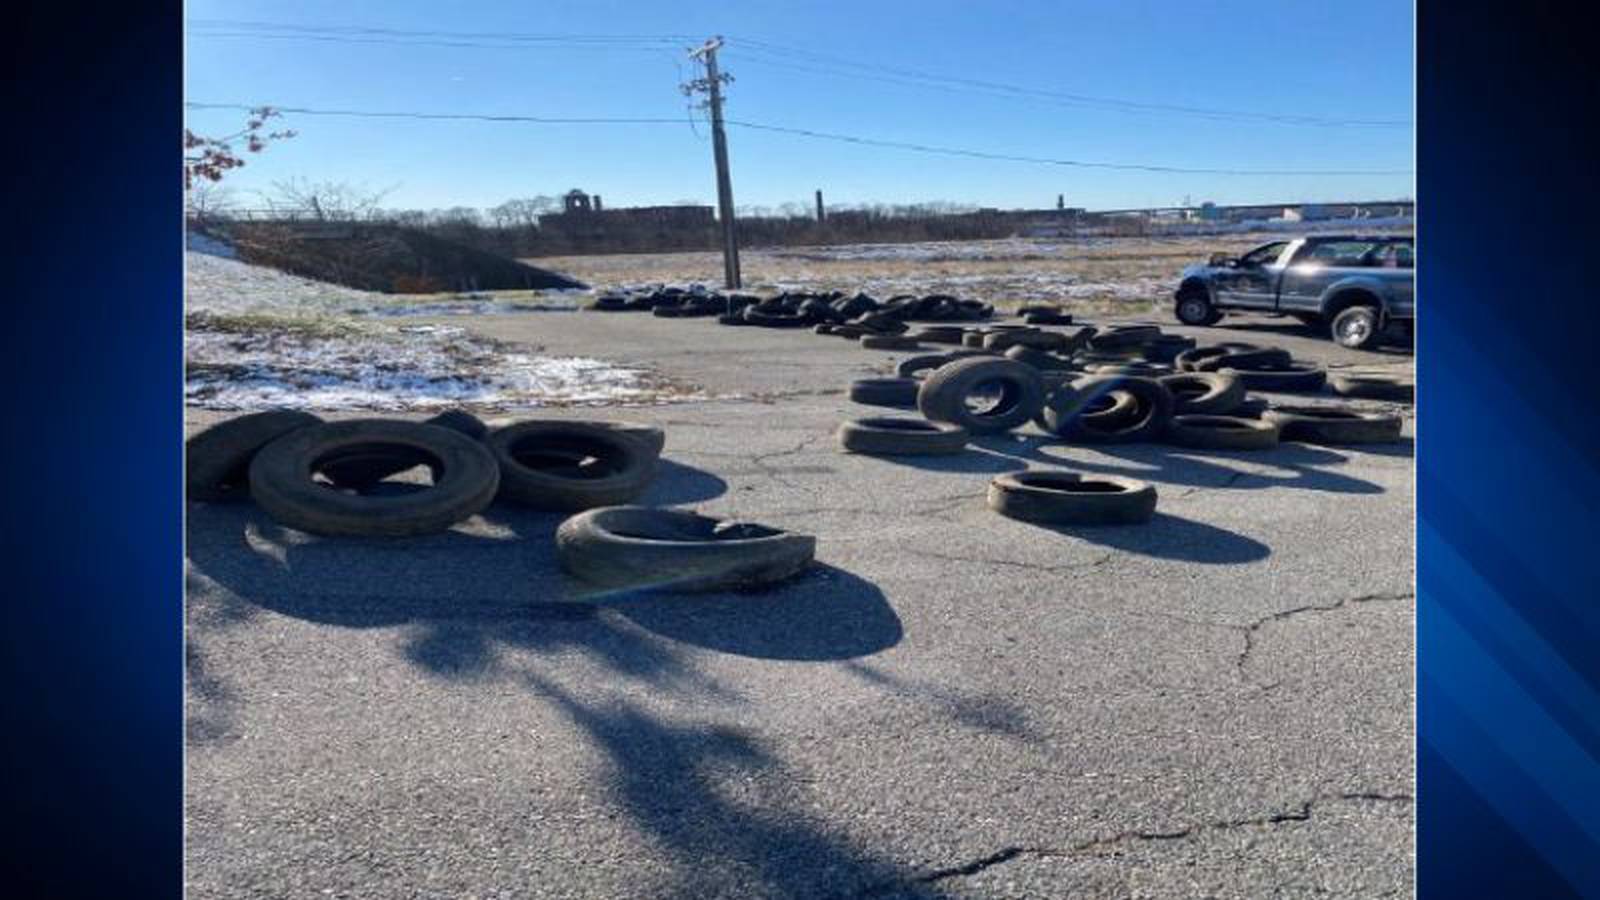 Over 100 car tires dumped in Fall River parking lot; police